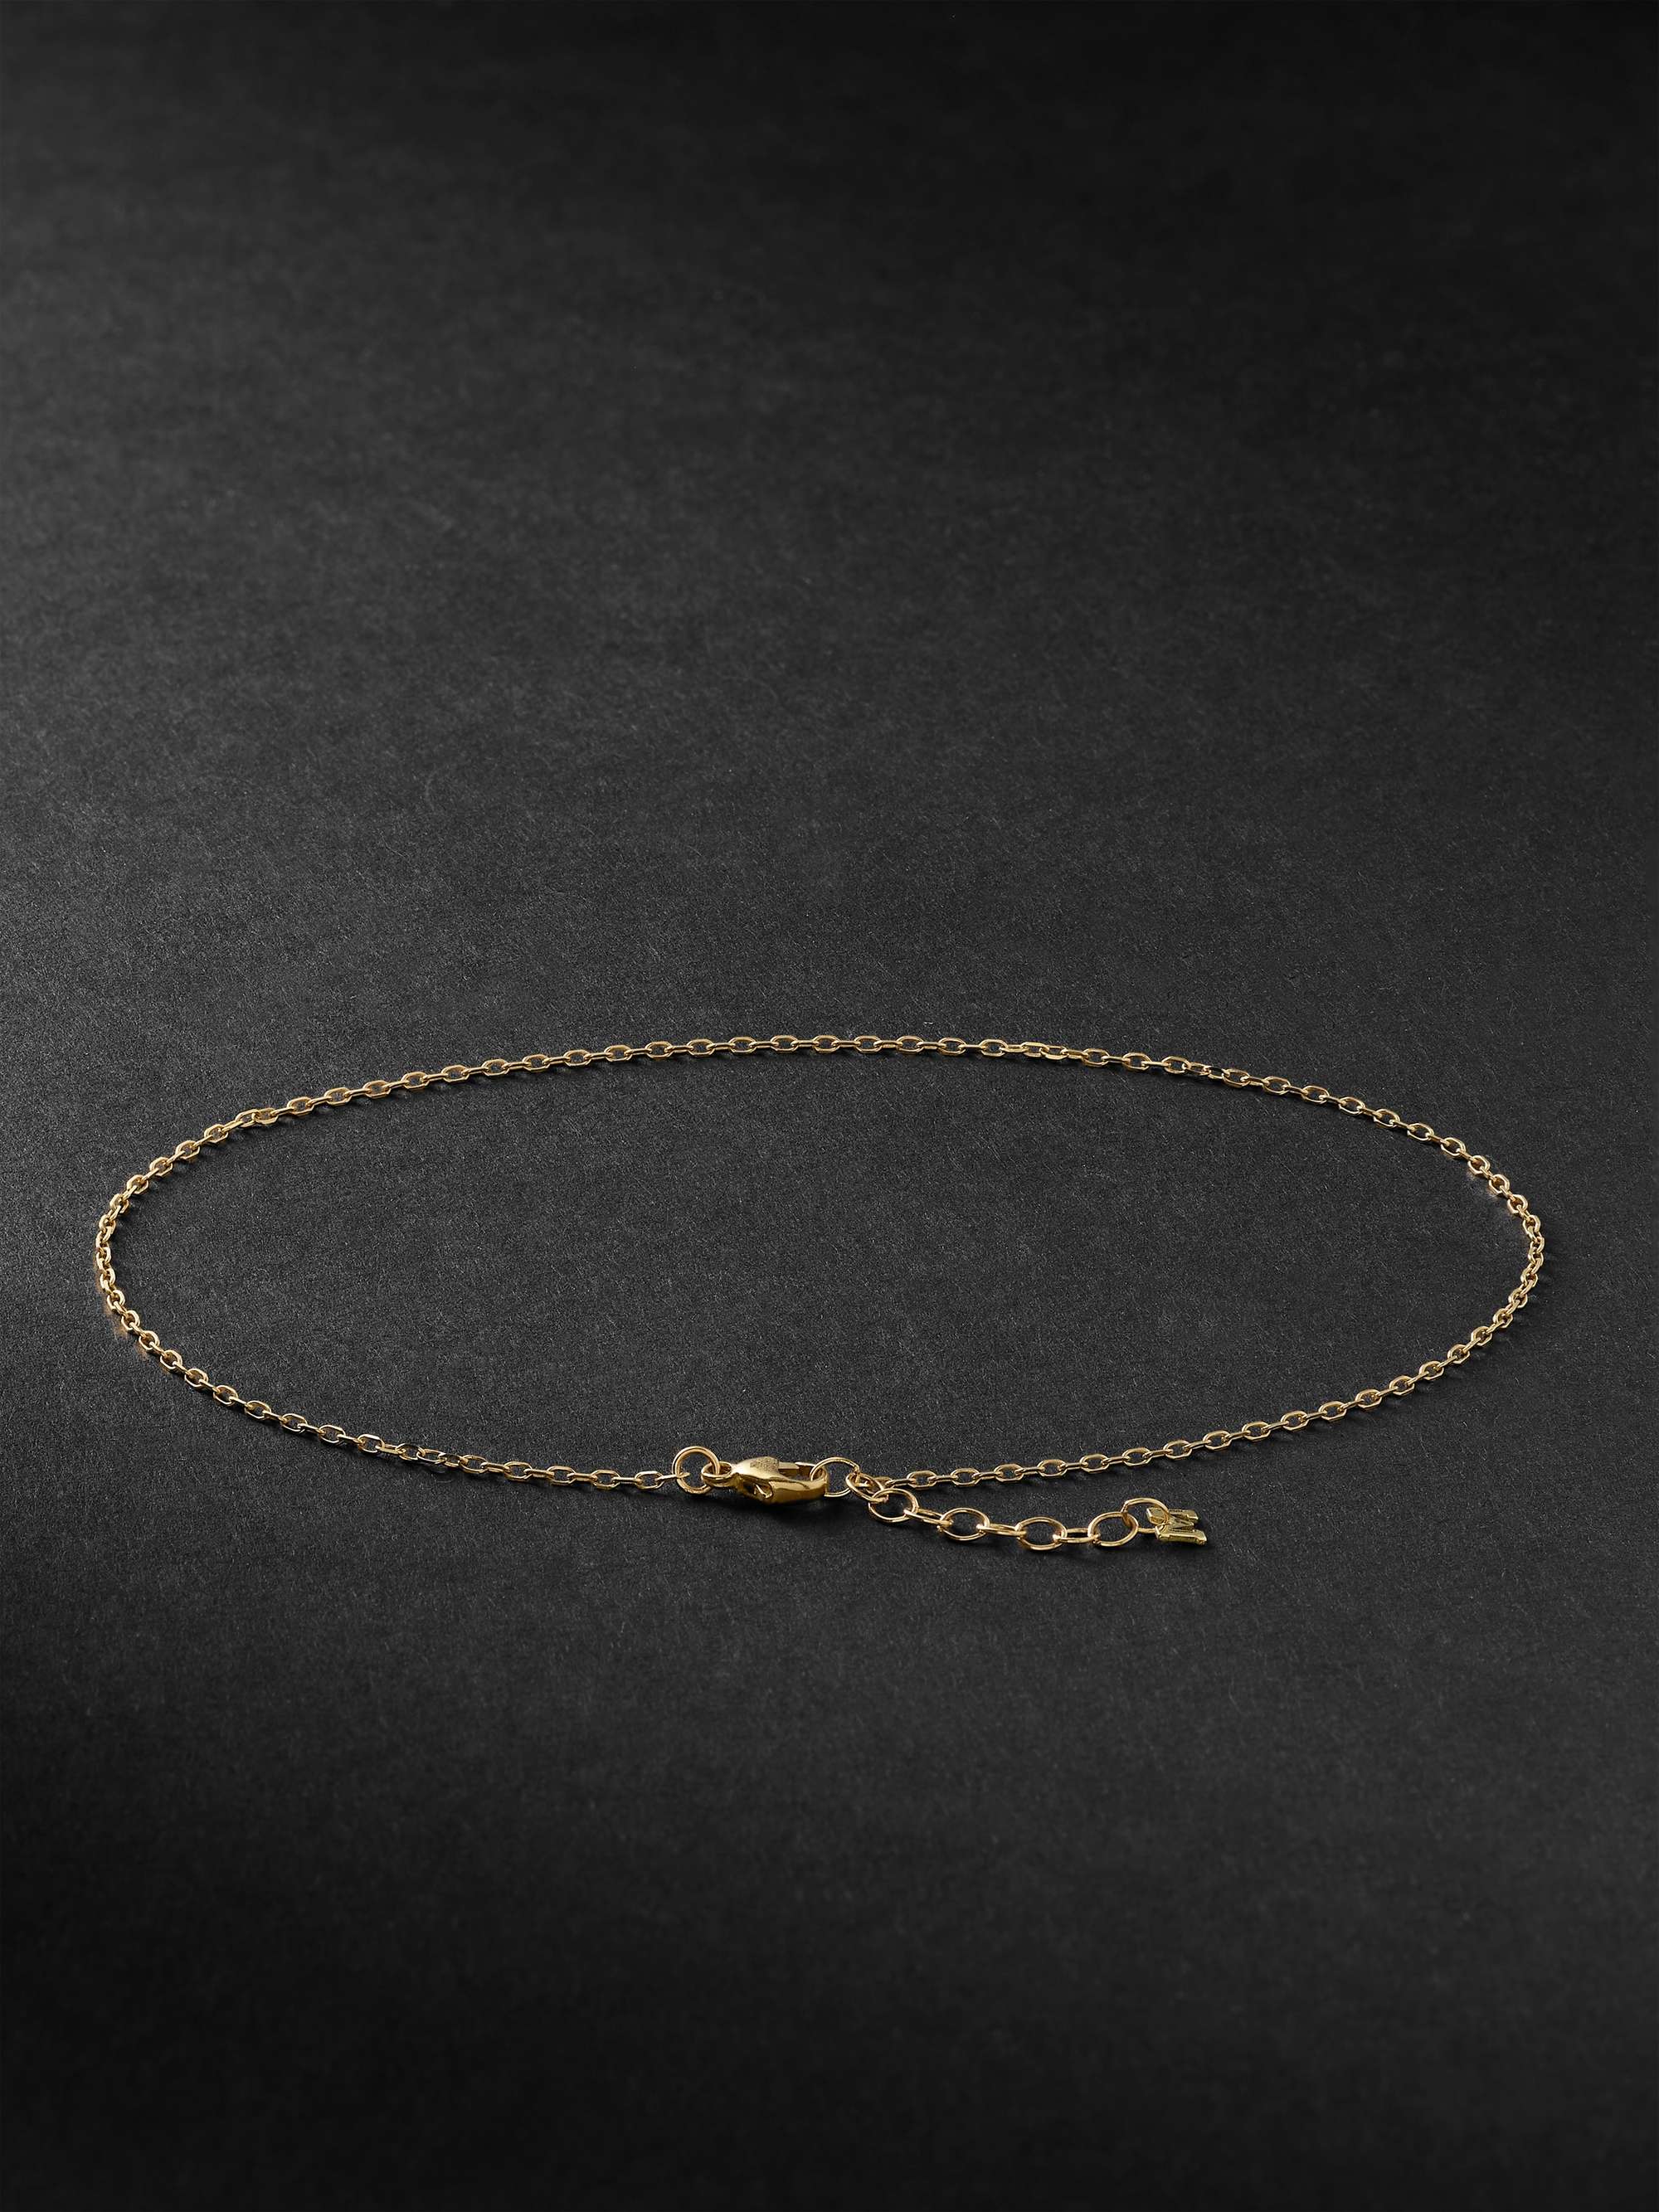 MATEO Gold Chain Anklet